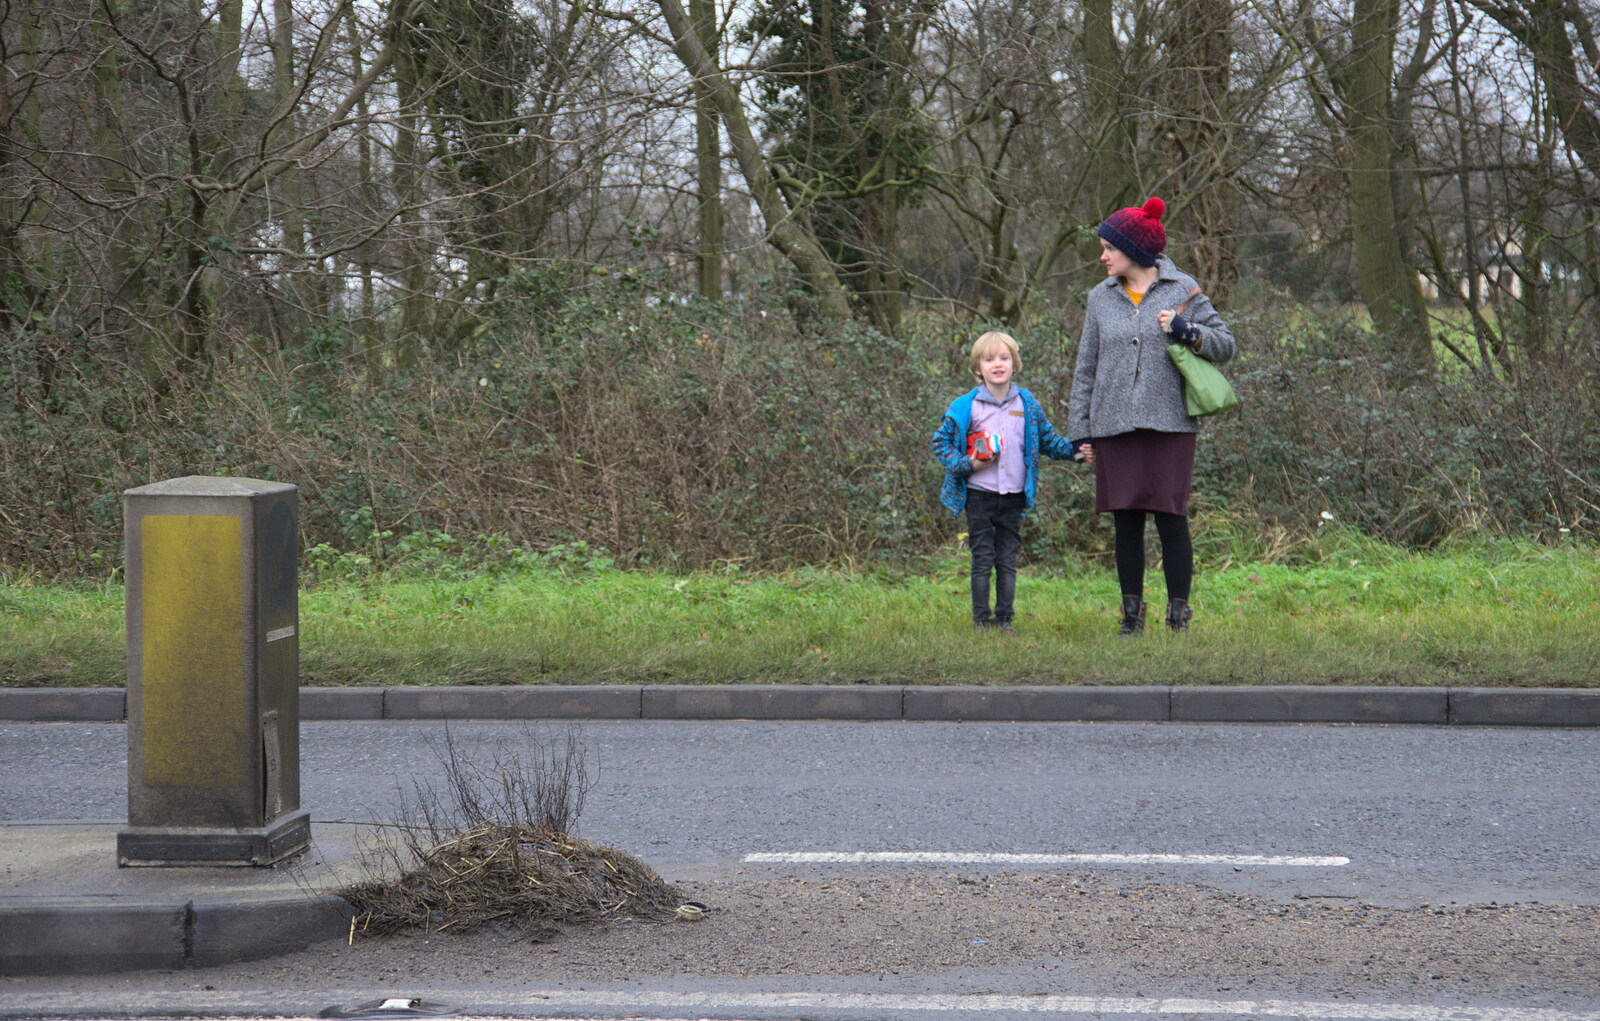 Harry and Isobel wait to cross the road from Christmas Day and The Swan Inn, Brome, Suffolk - 25th December 2017